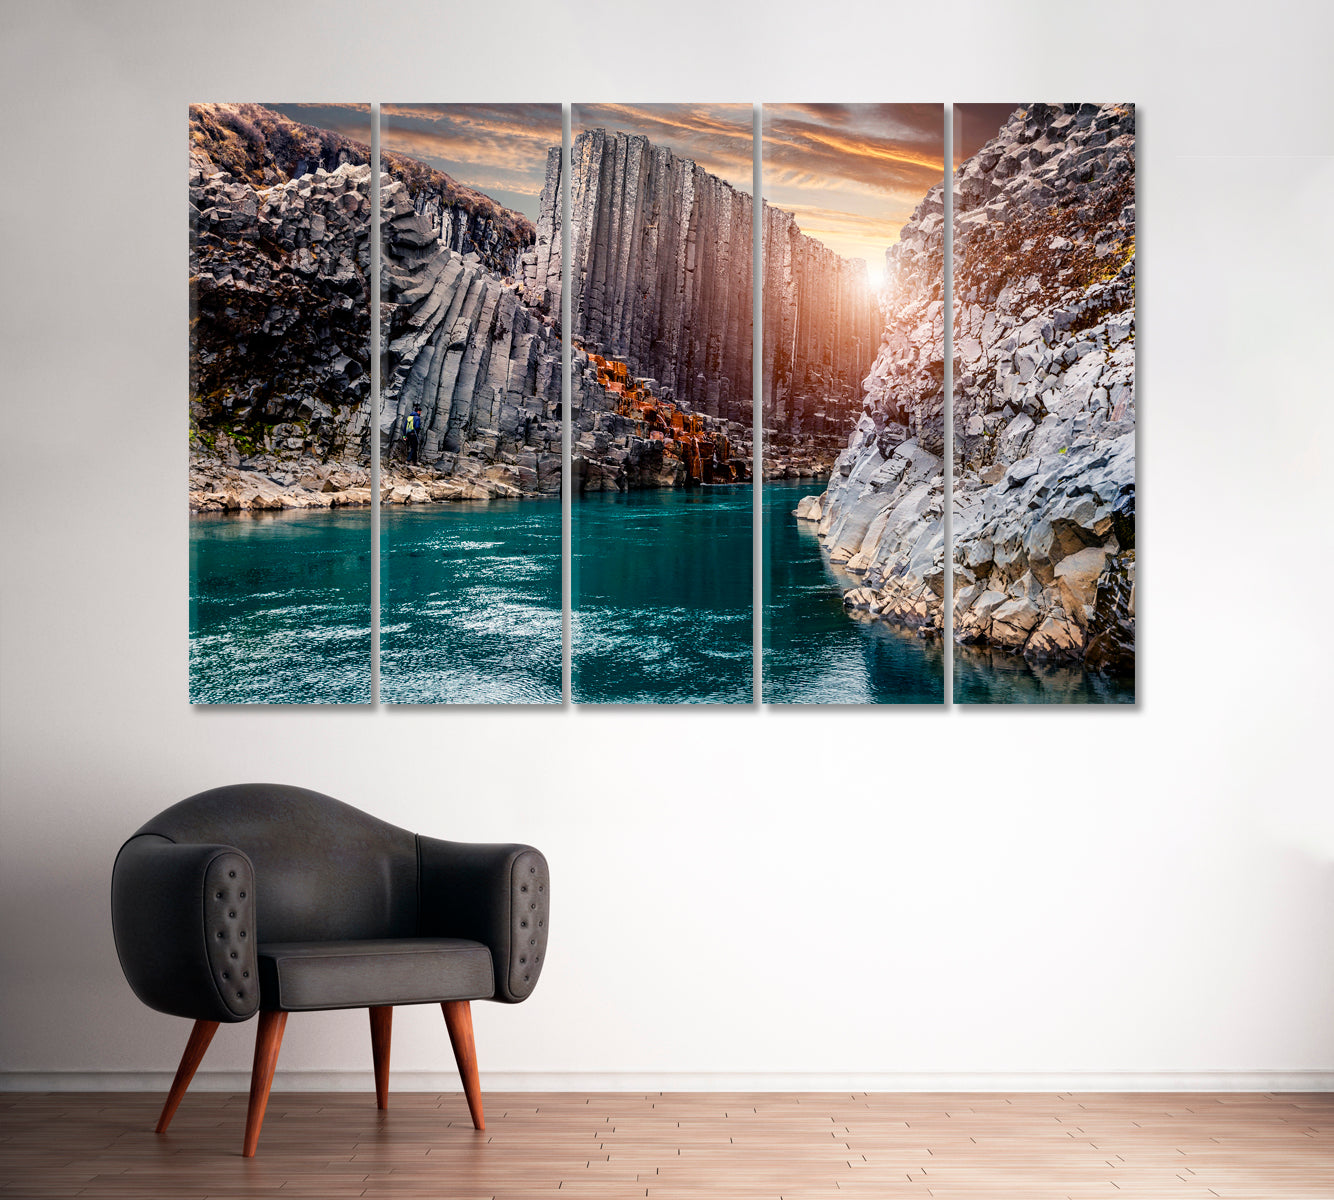 Studlagil Canyon Nature Landscape of Iceland Canvas Print ArtLexy 5 Panels 36"x24" inches 